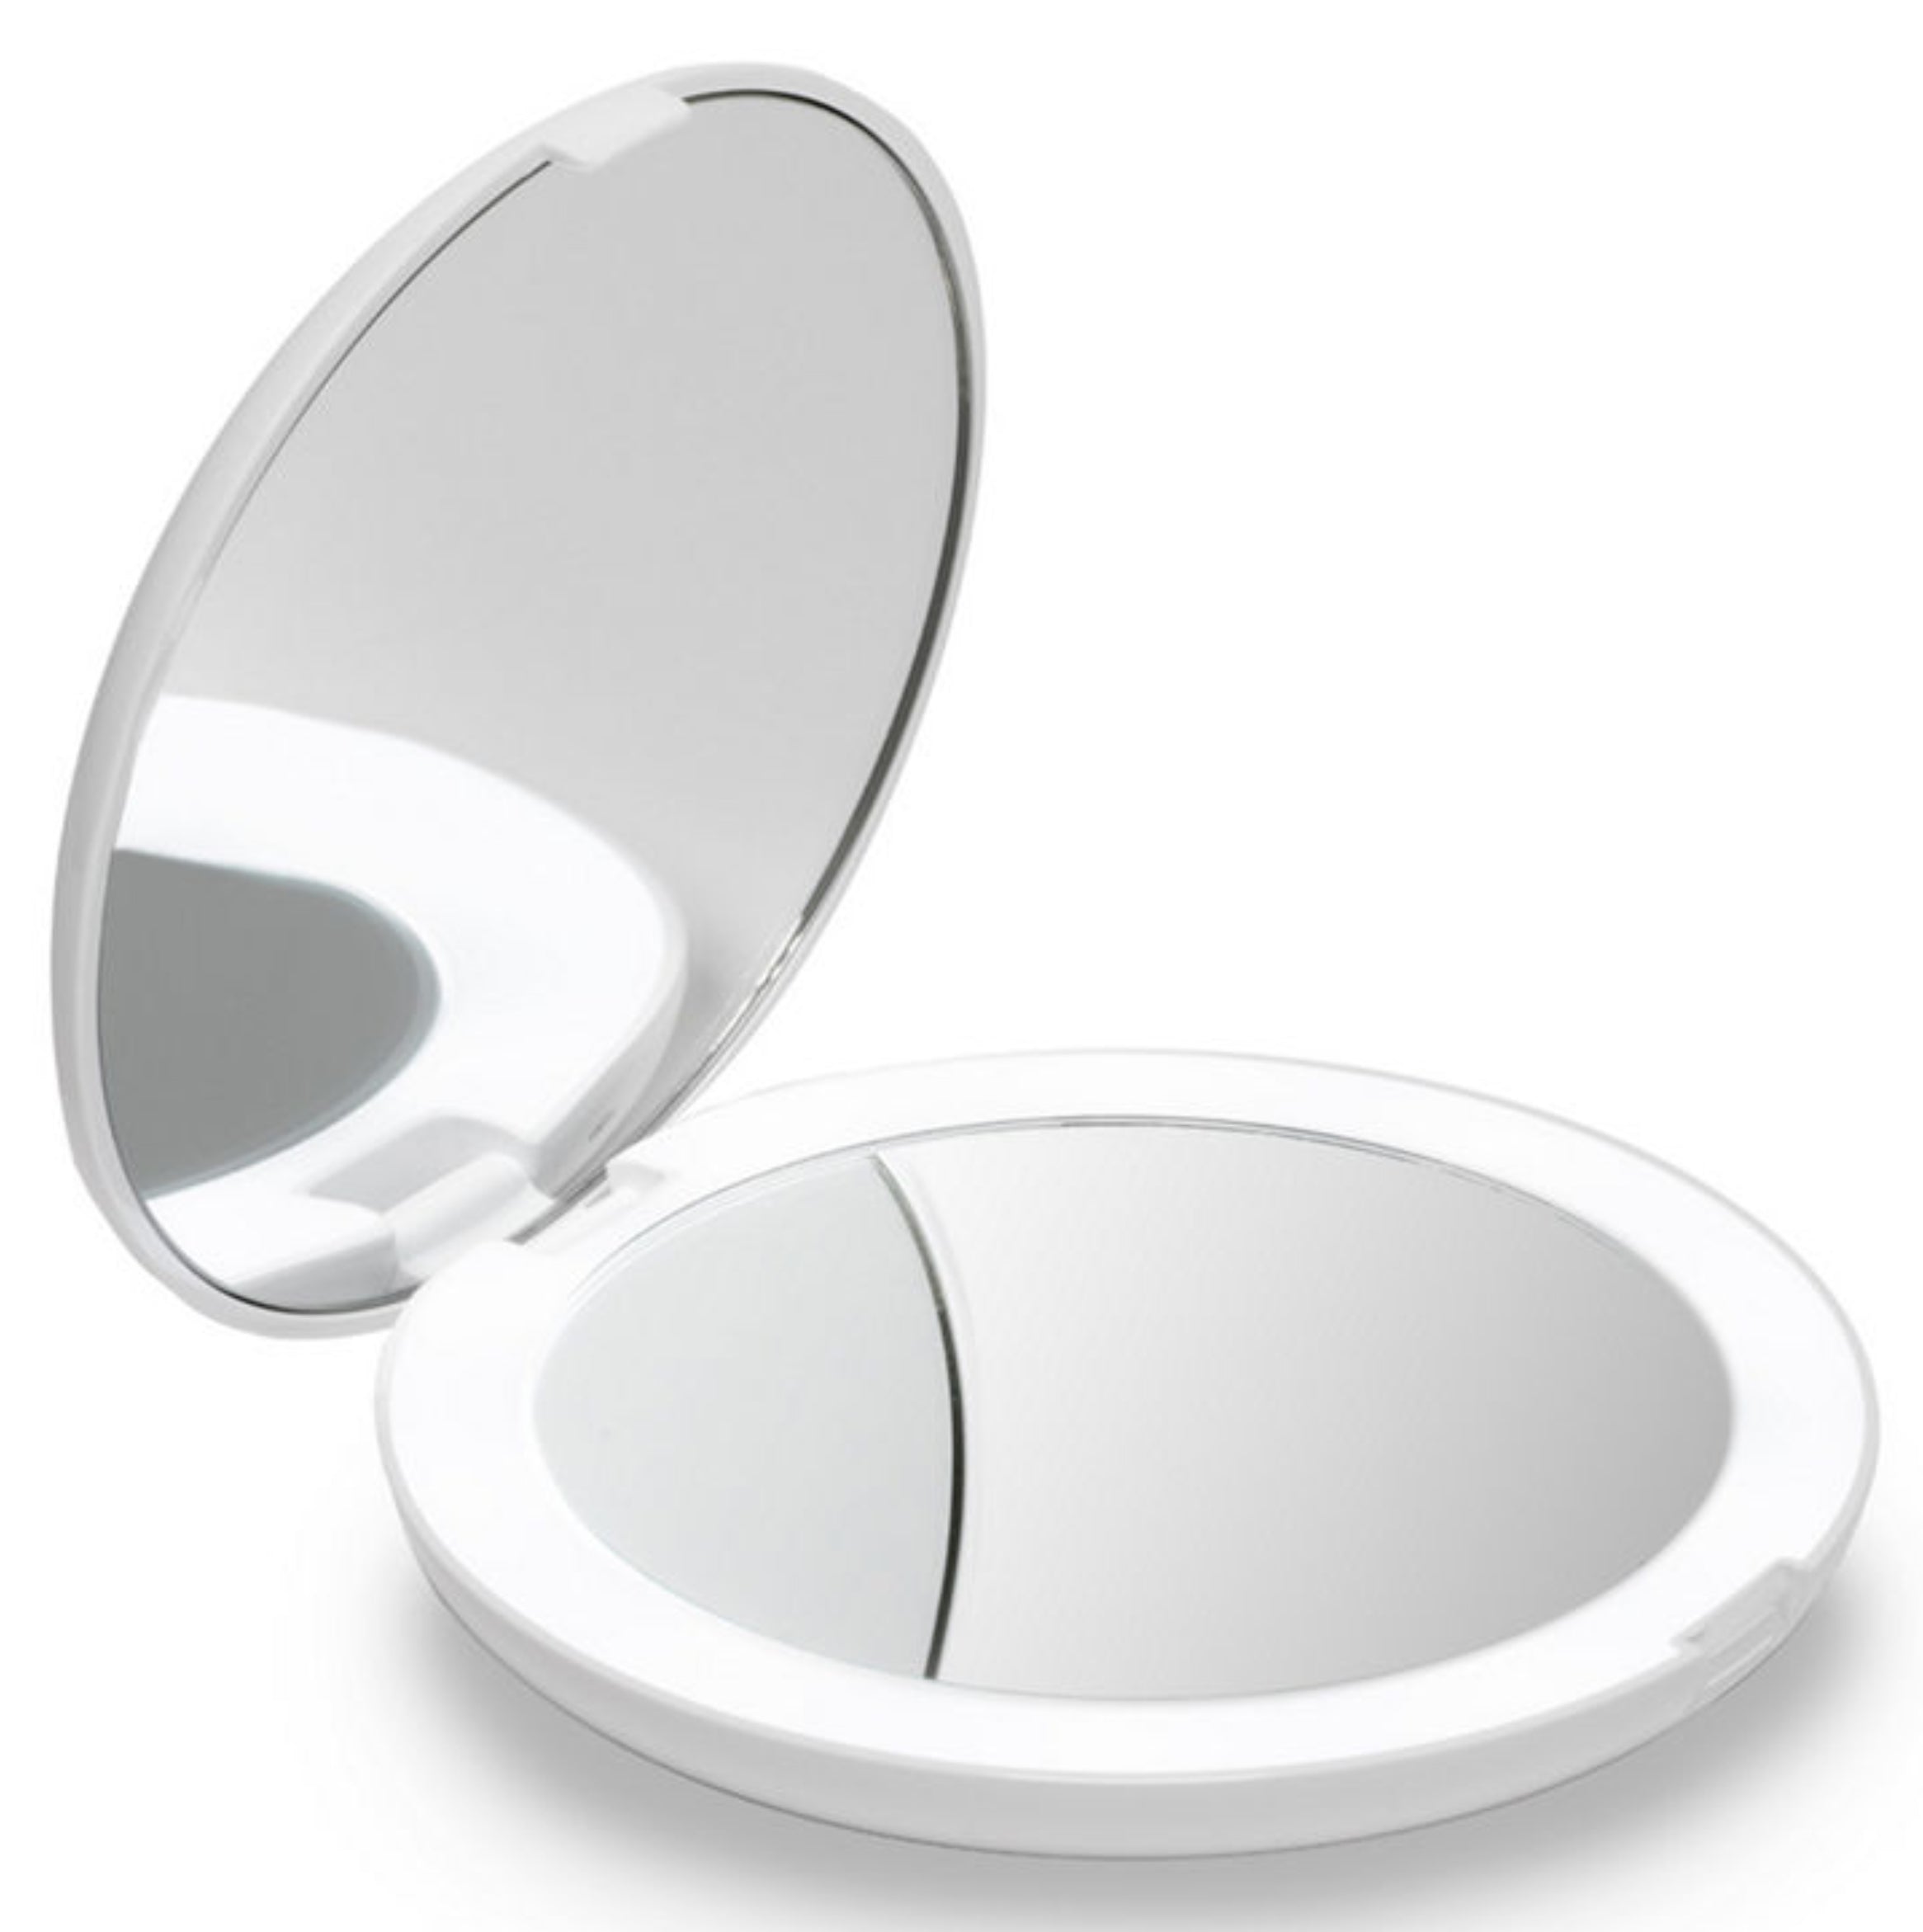 Lumi Compact Lighted Mirror – 1X/10X Magnification